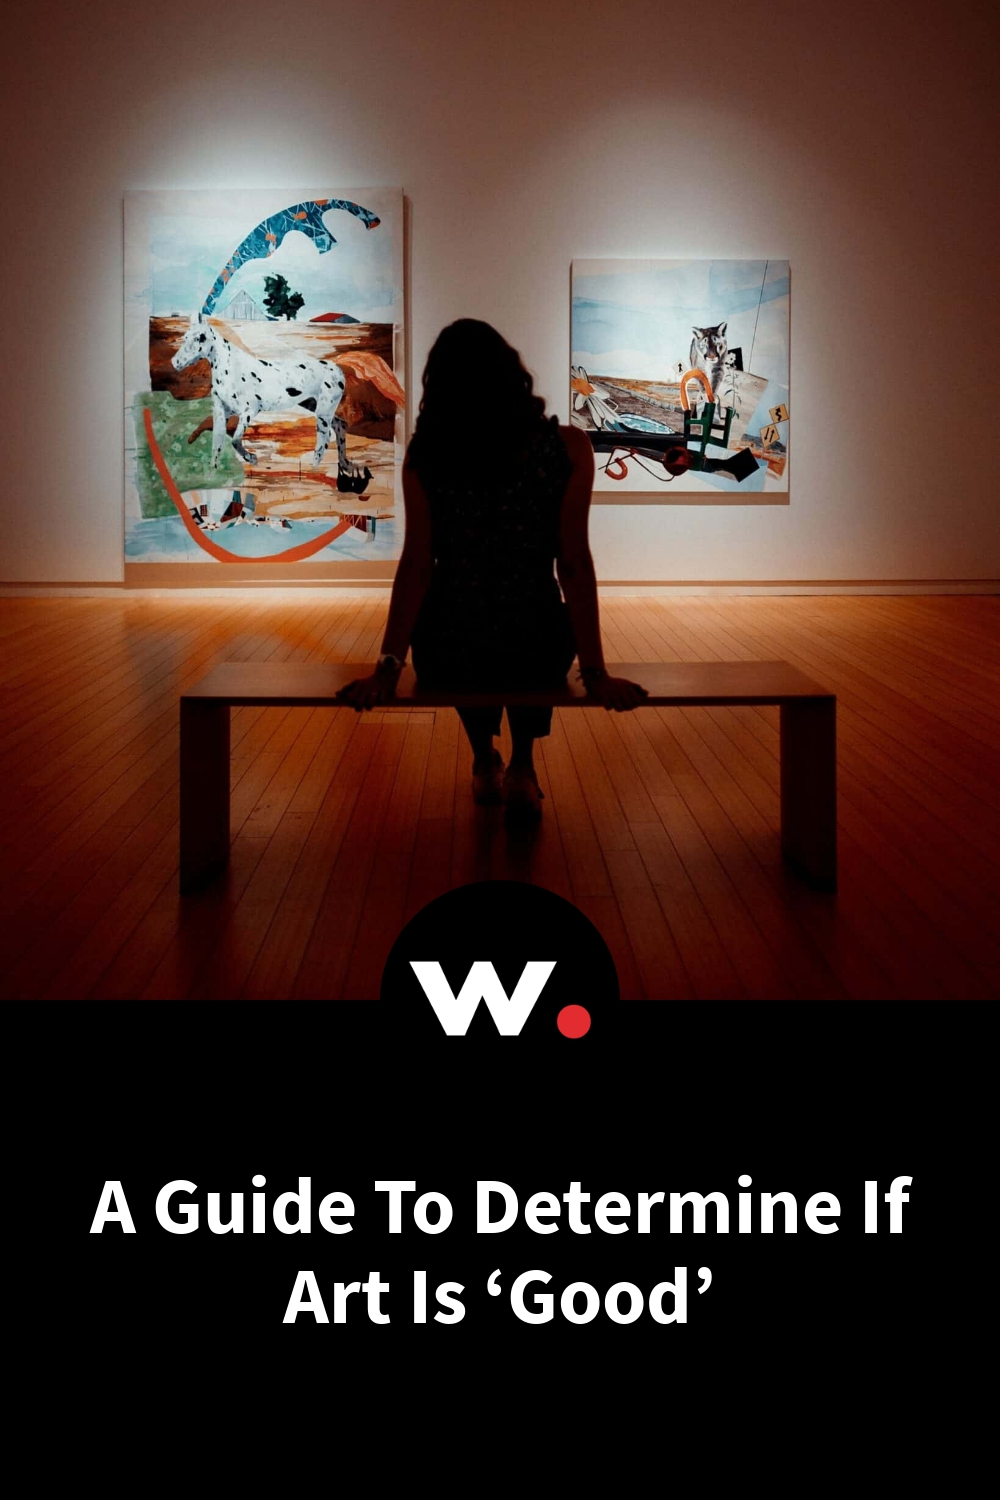 A Guide To Determine If Art Is ‘Good’